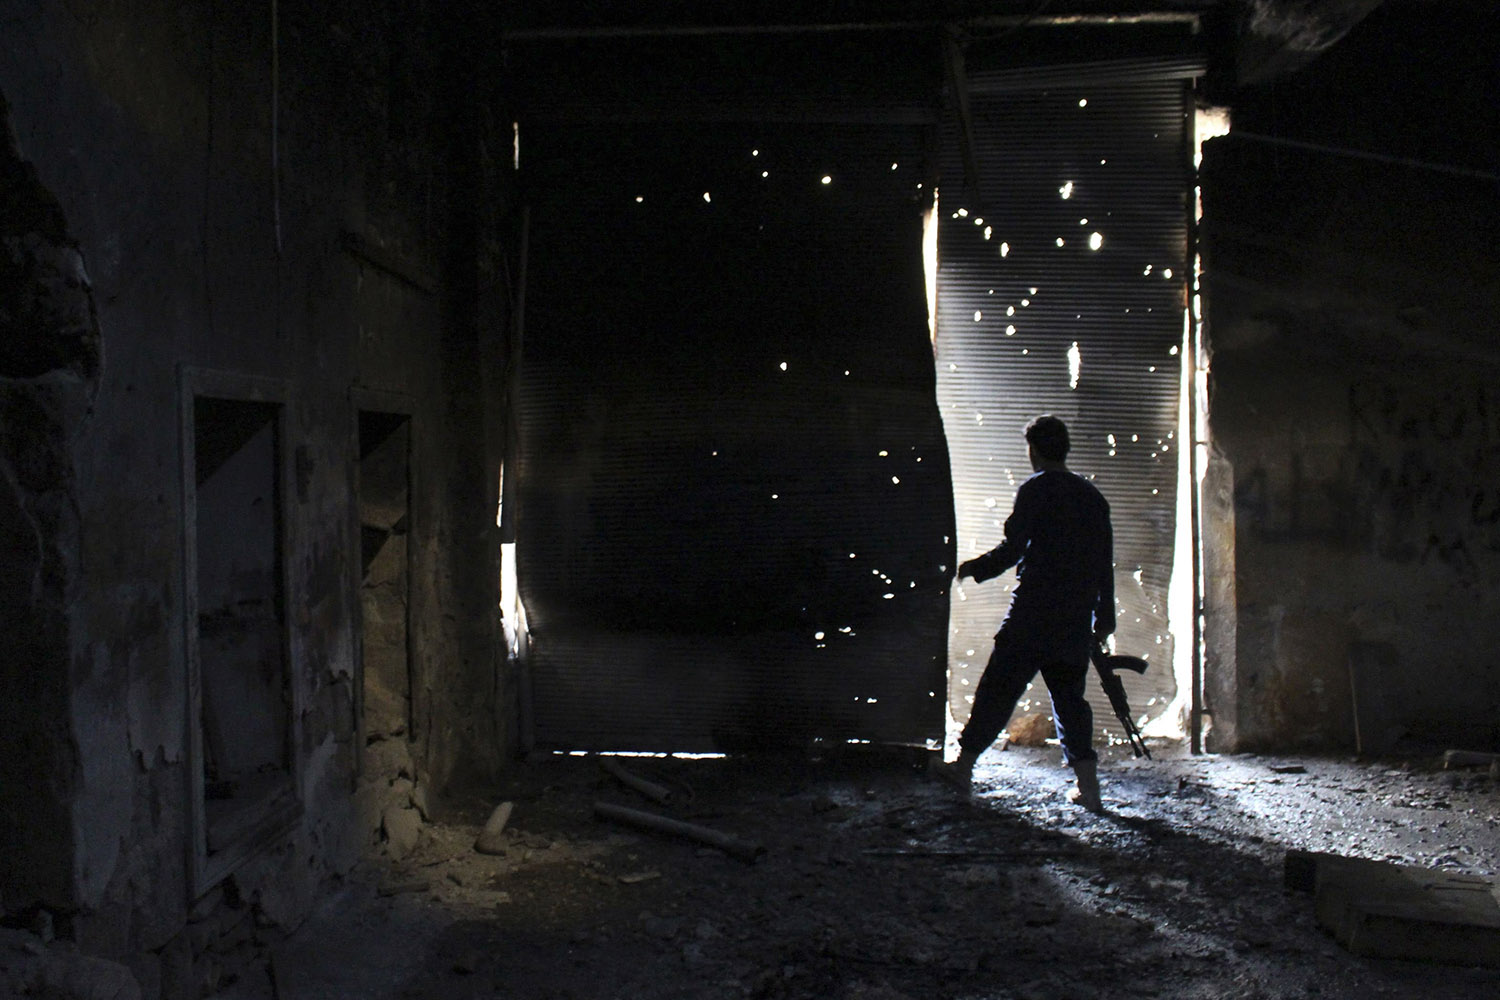 A Free Syrian Army fighter carries his weapon as he peeks out from a damaged shop in Aleppo